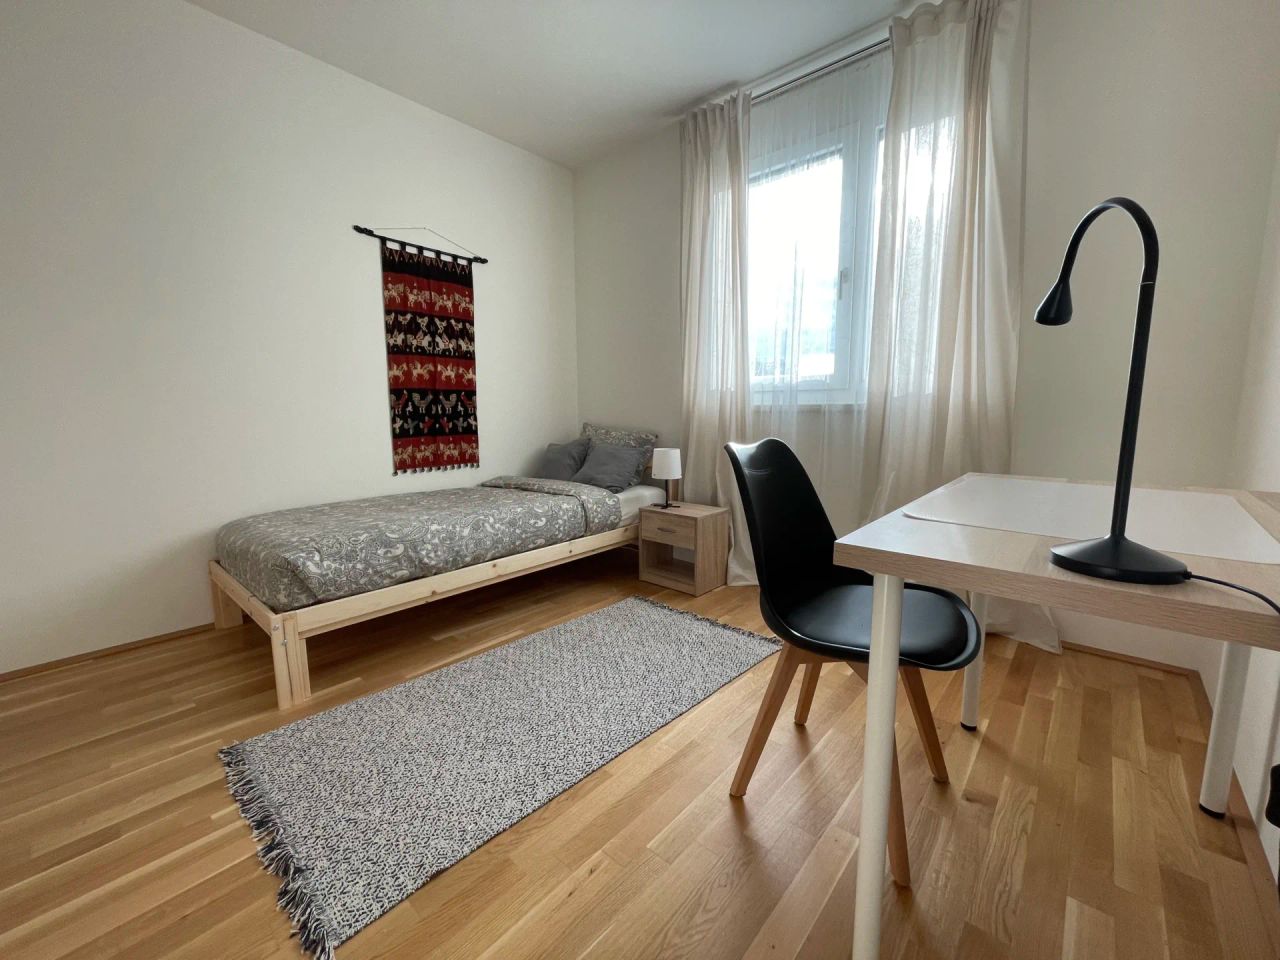 SPACIOUS, BRIGHT AND MODERN THREE BEDROOM APARTMENT IN VIENNA